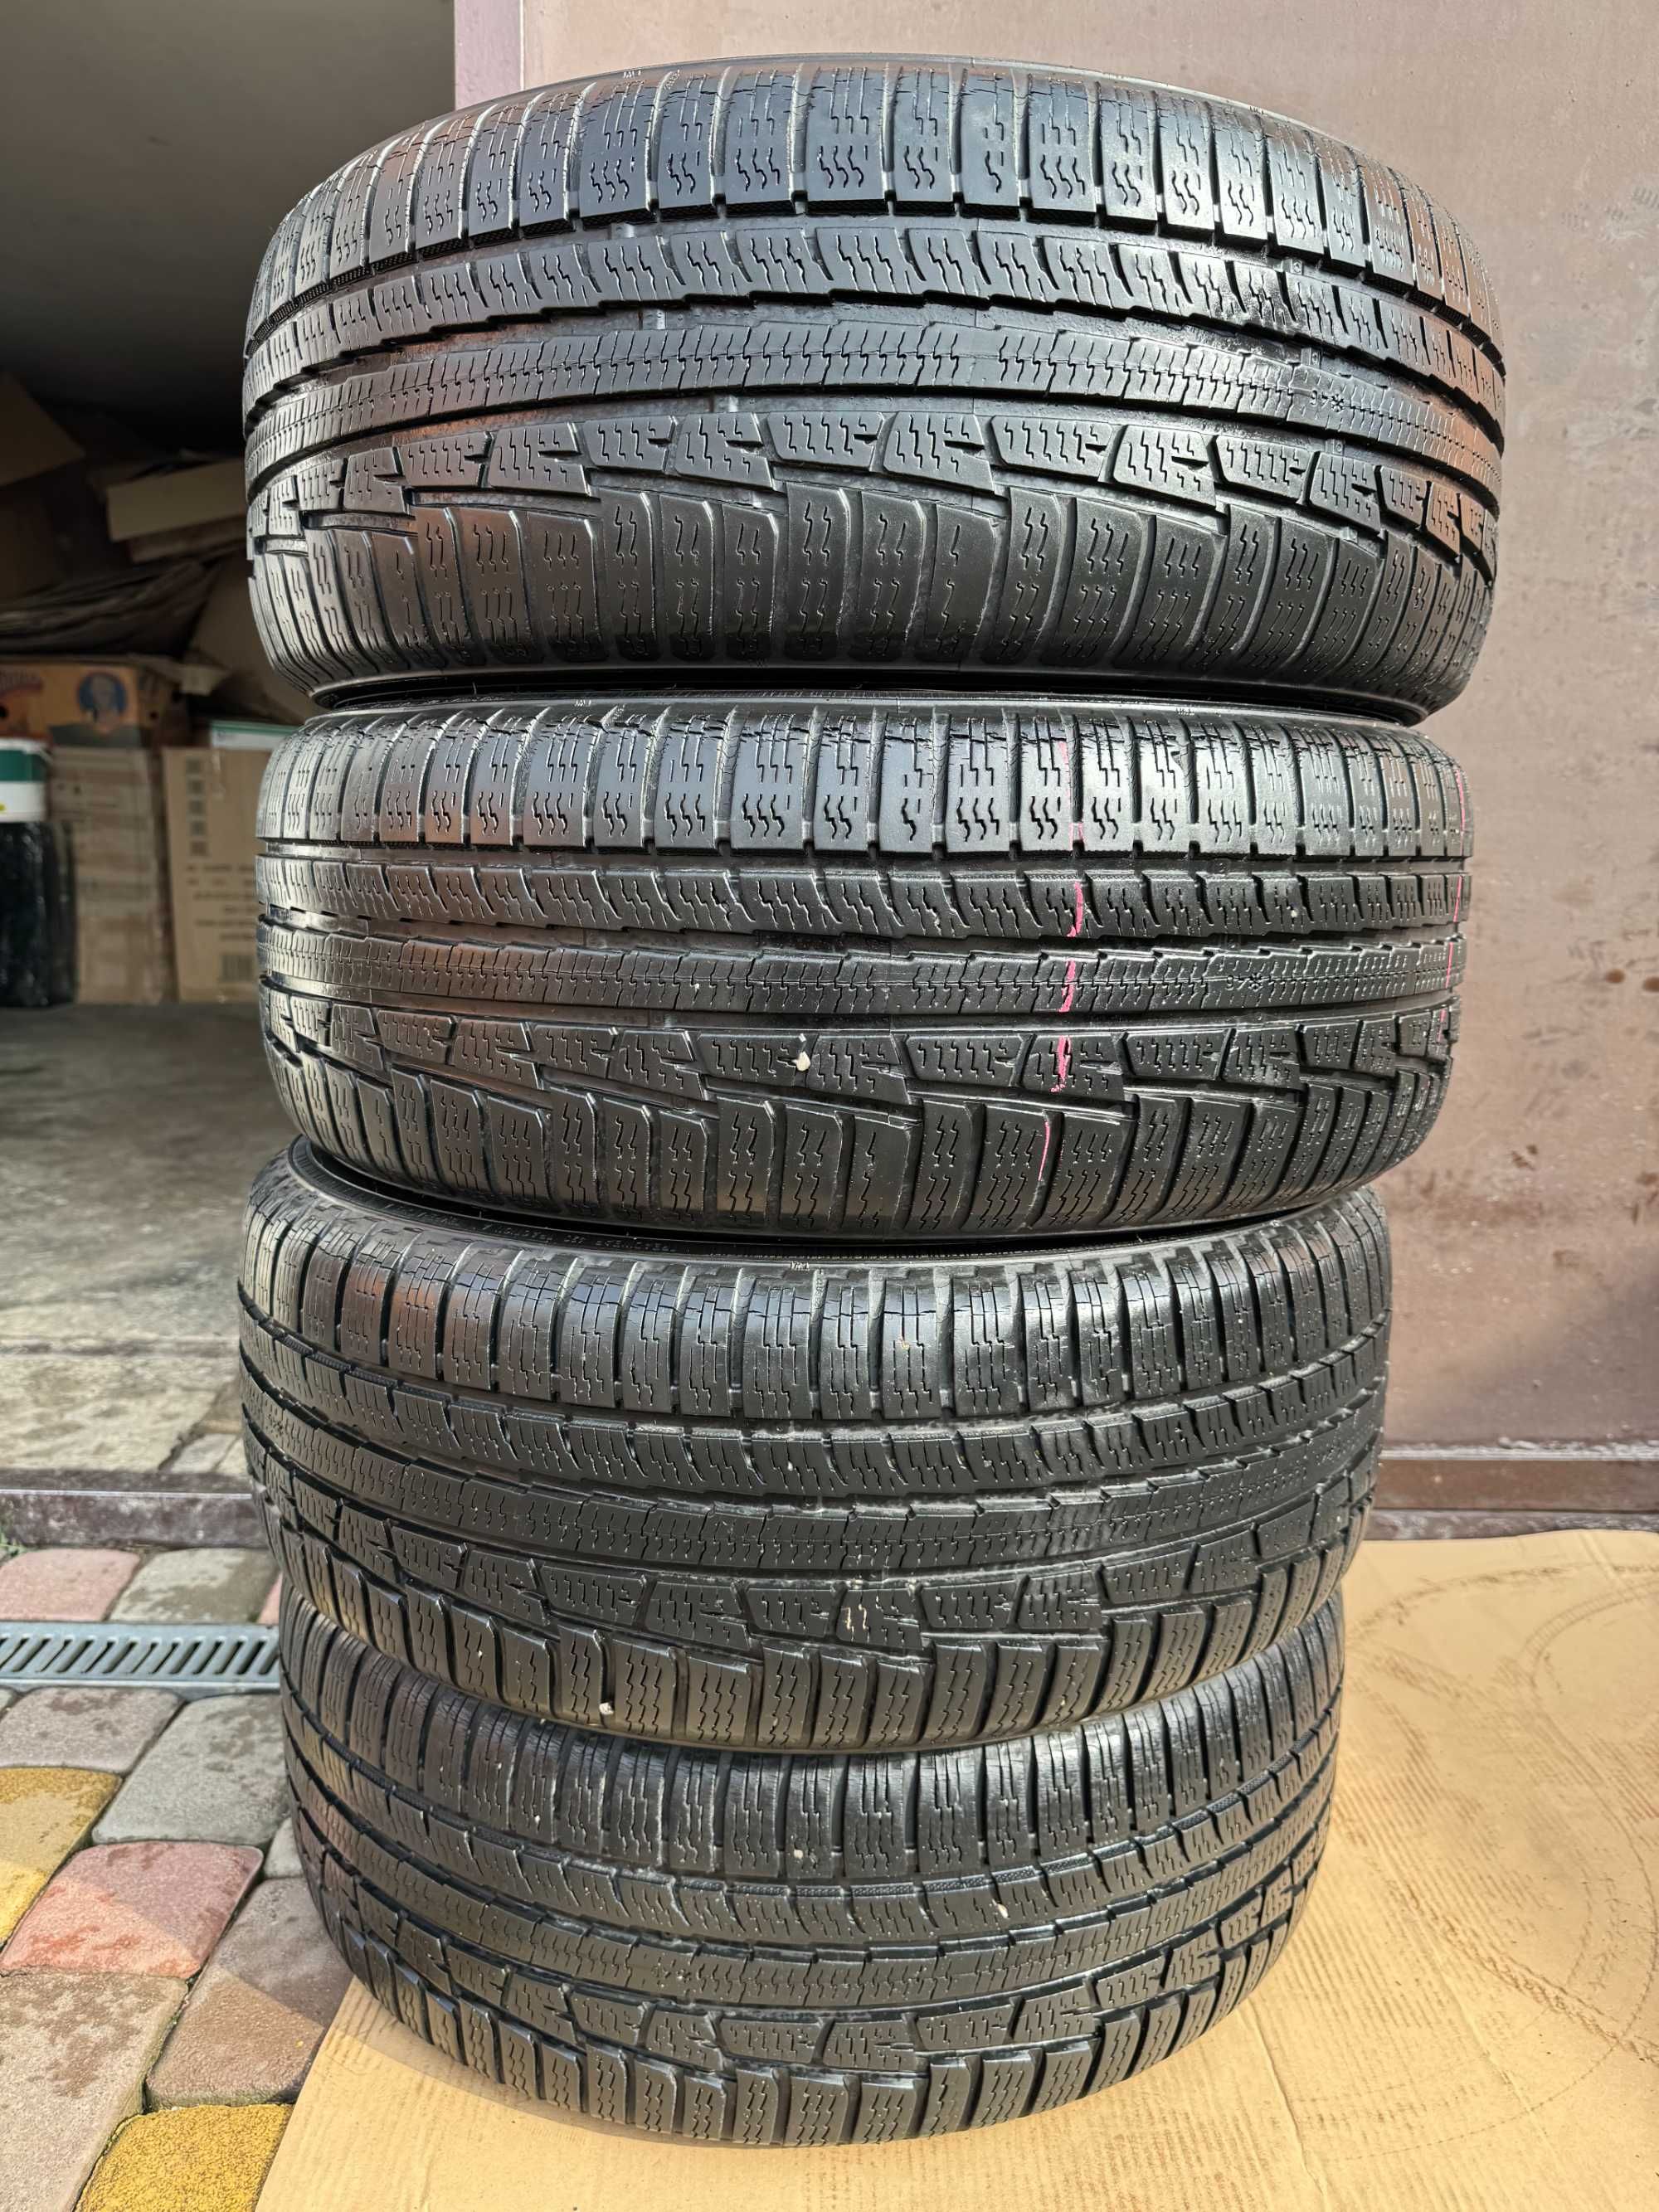 Шини Nokian 225/55 R-16 (99 H ) made in Russia -зима